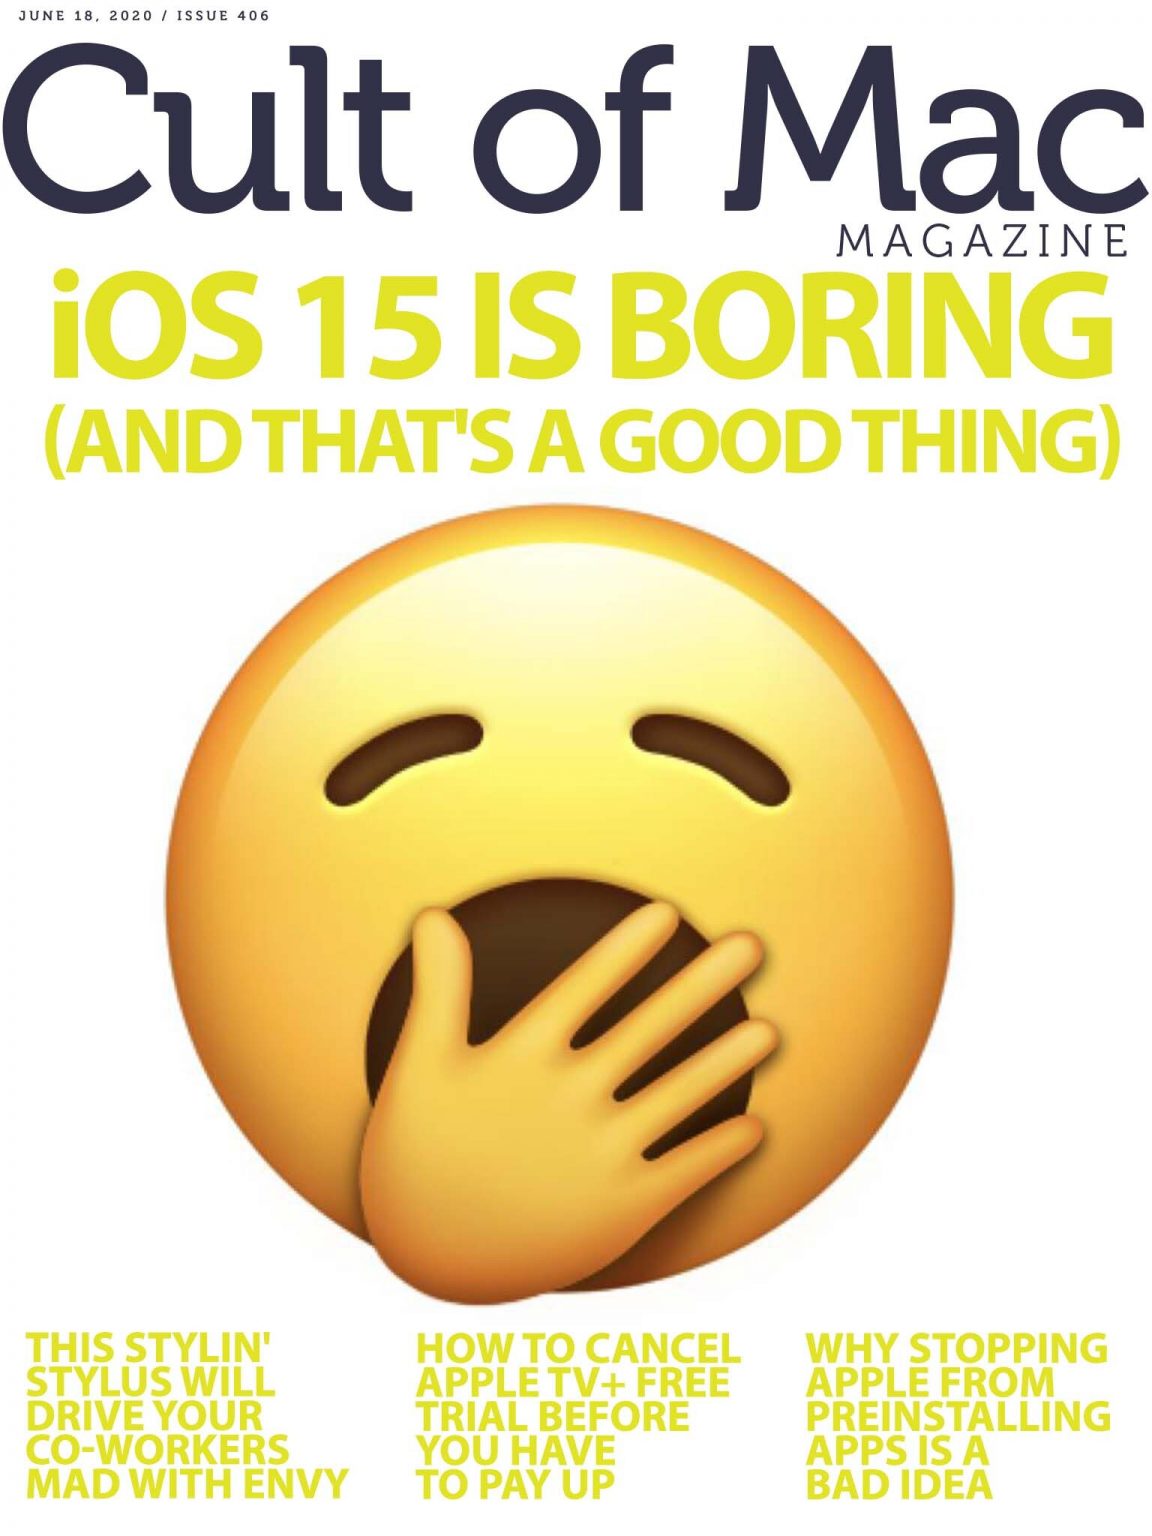 Cult of Mac Magazine: iOS 15 is boring (and that's a good thing).